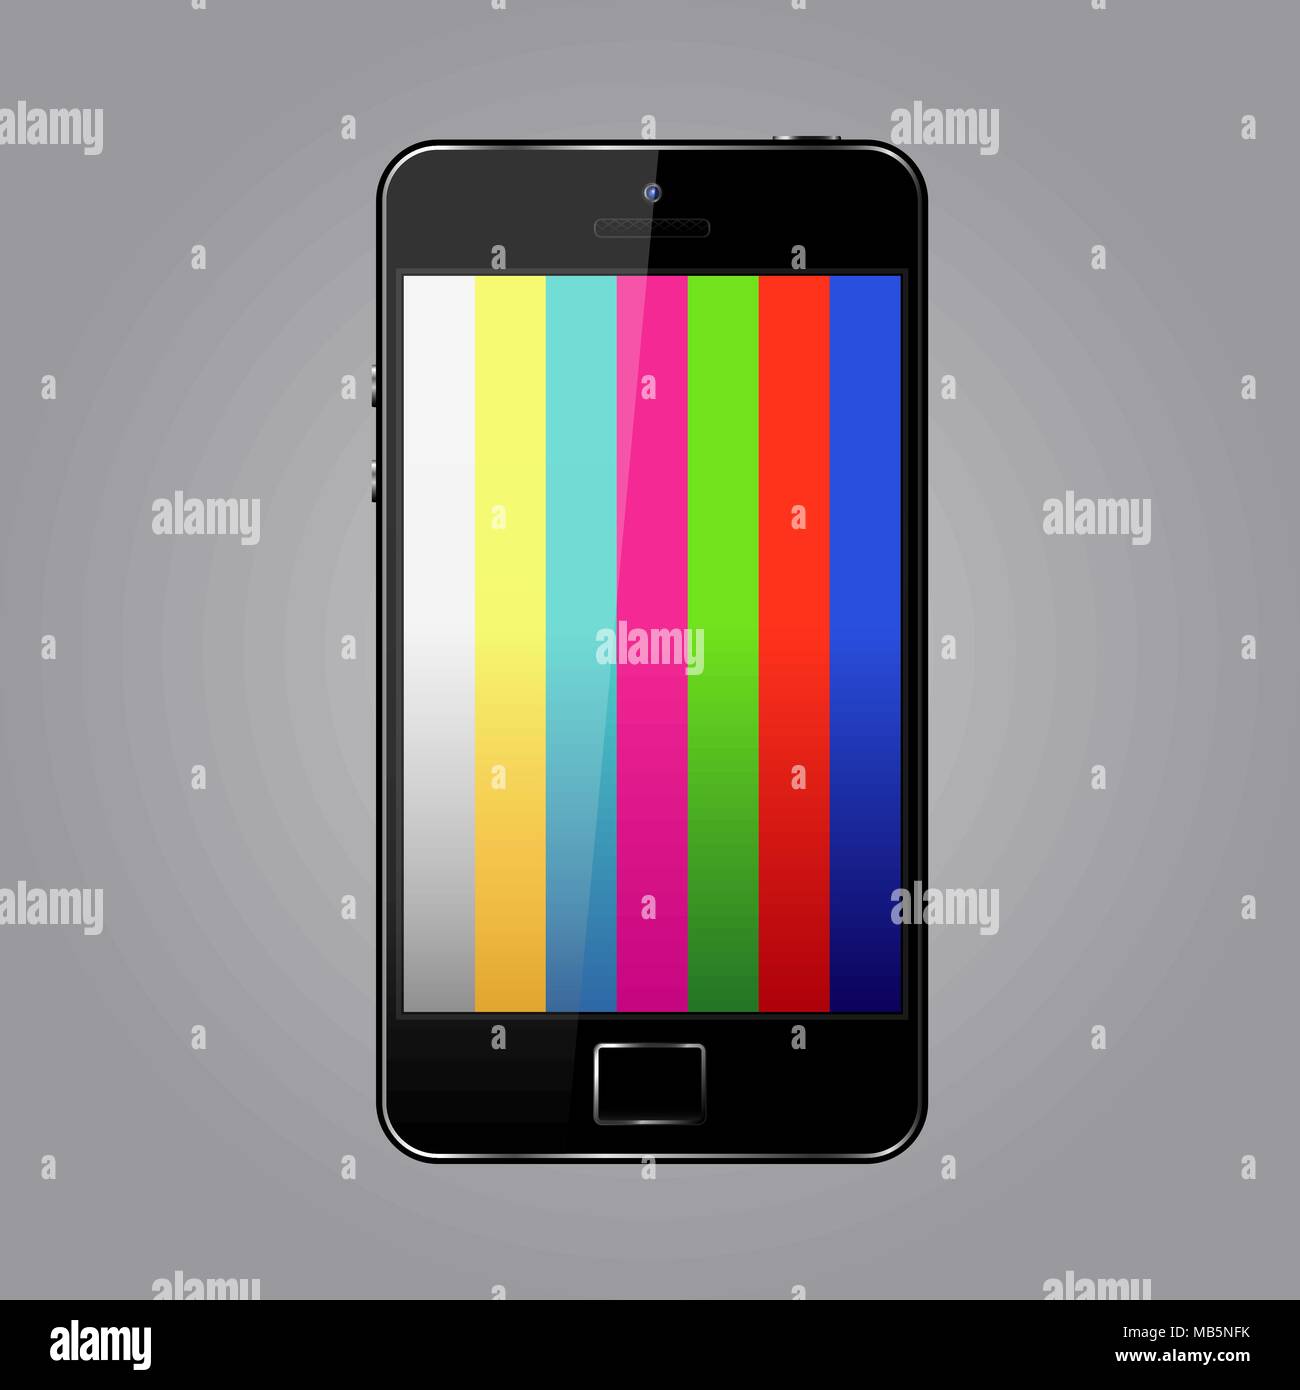 Mobile phone with tv test pattern screen Stock Vector